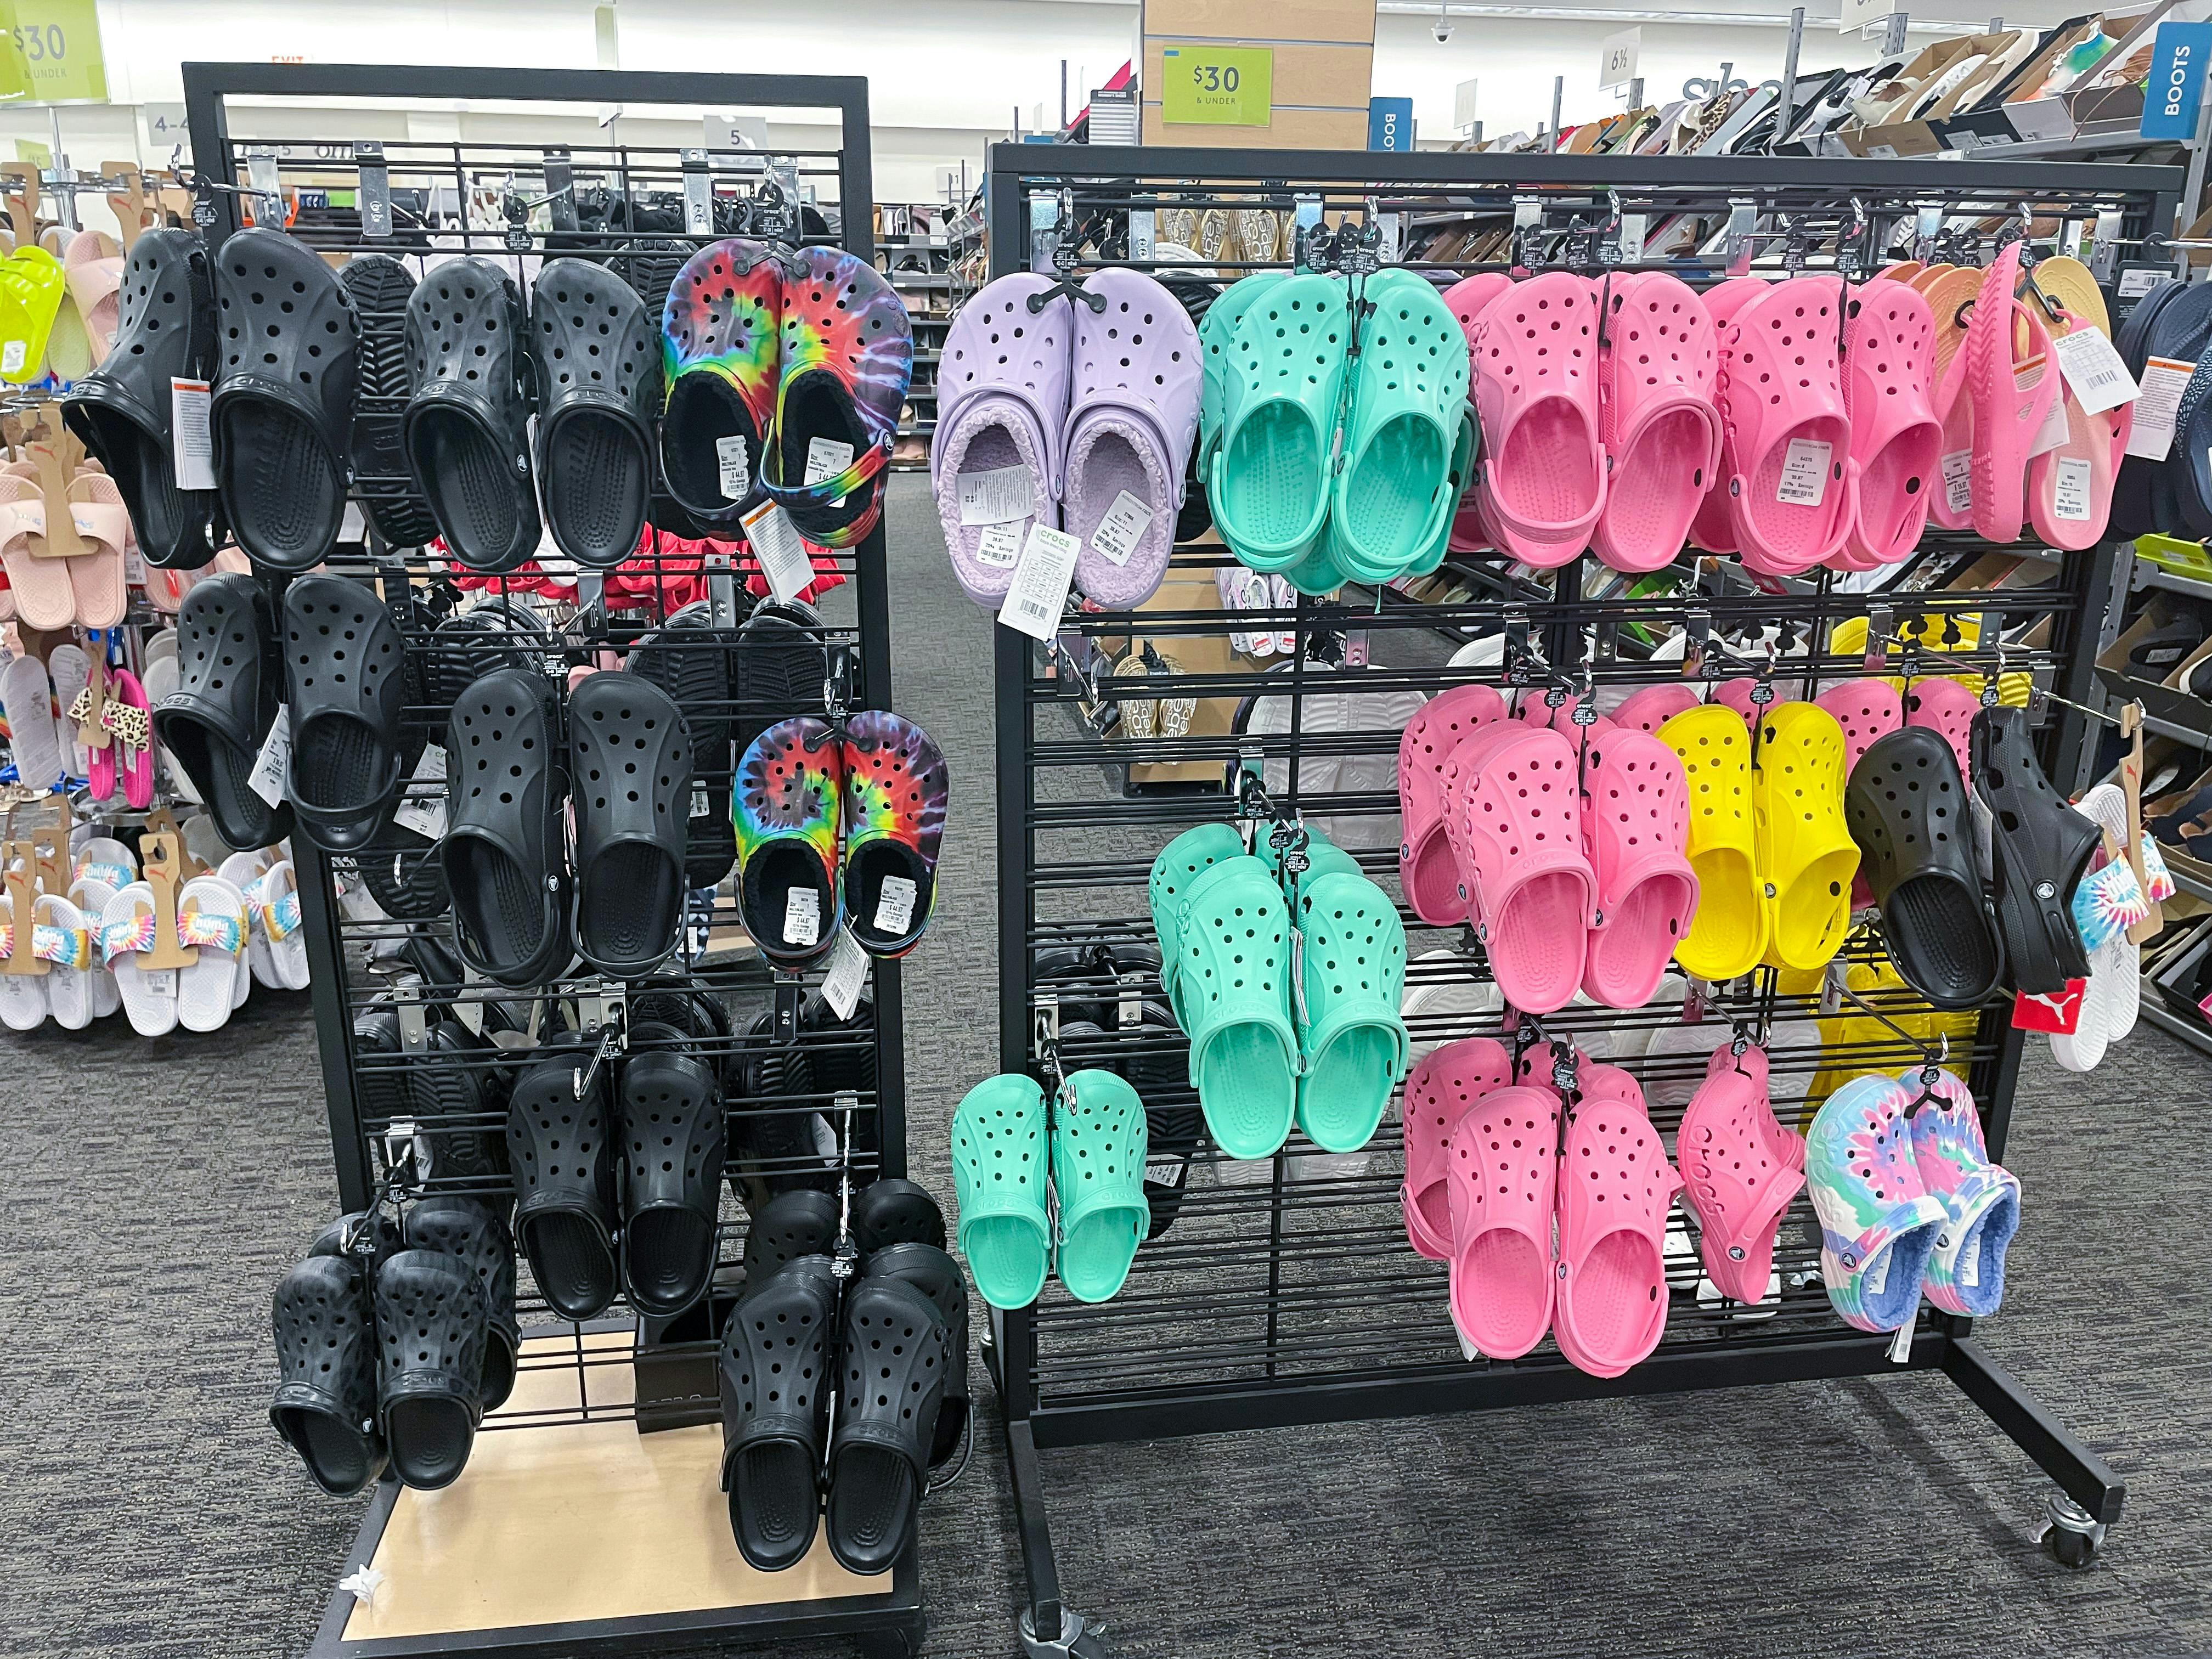 A display of hanging Crocs classic clogs at a shoe store.